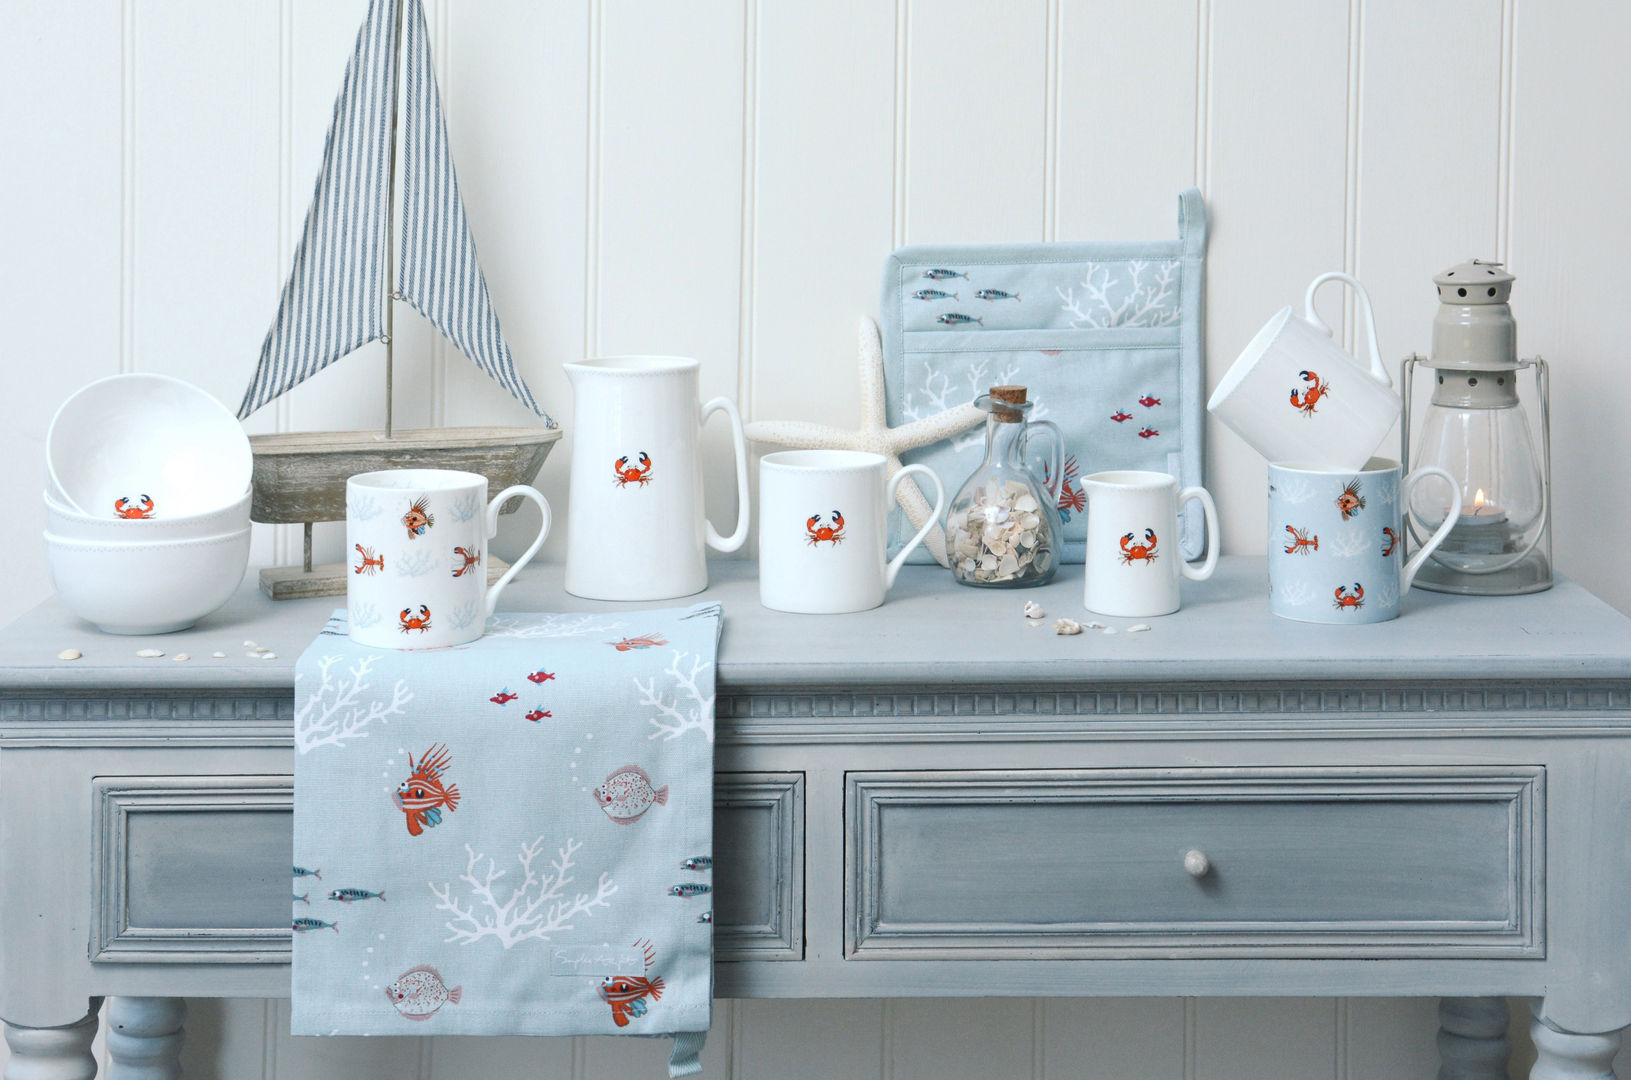 Sophie Allport 'What a catch!' Kitchen Textiles & China homify Country style kitchen Ceramic Cutlery, crockery & glassware